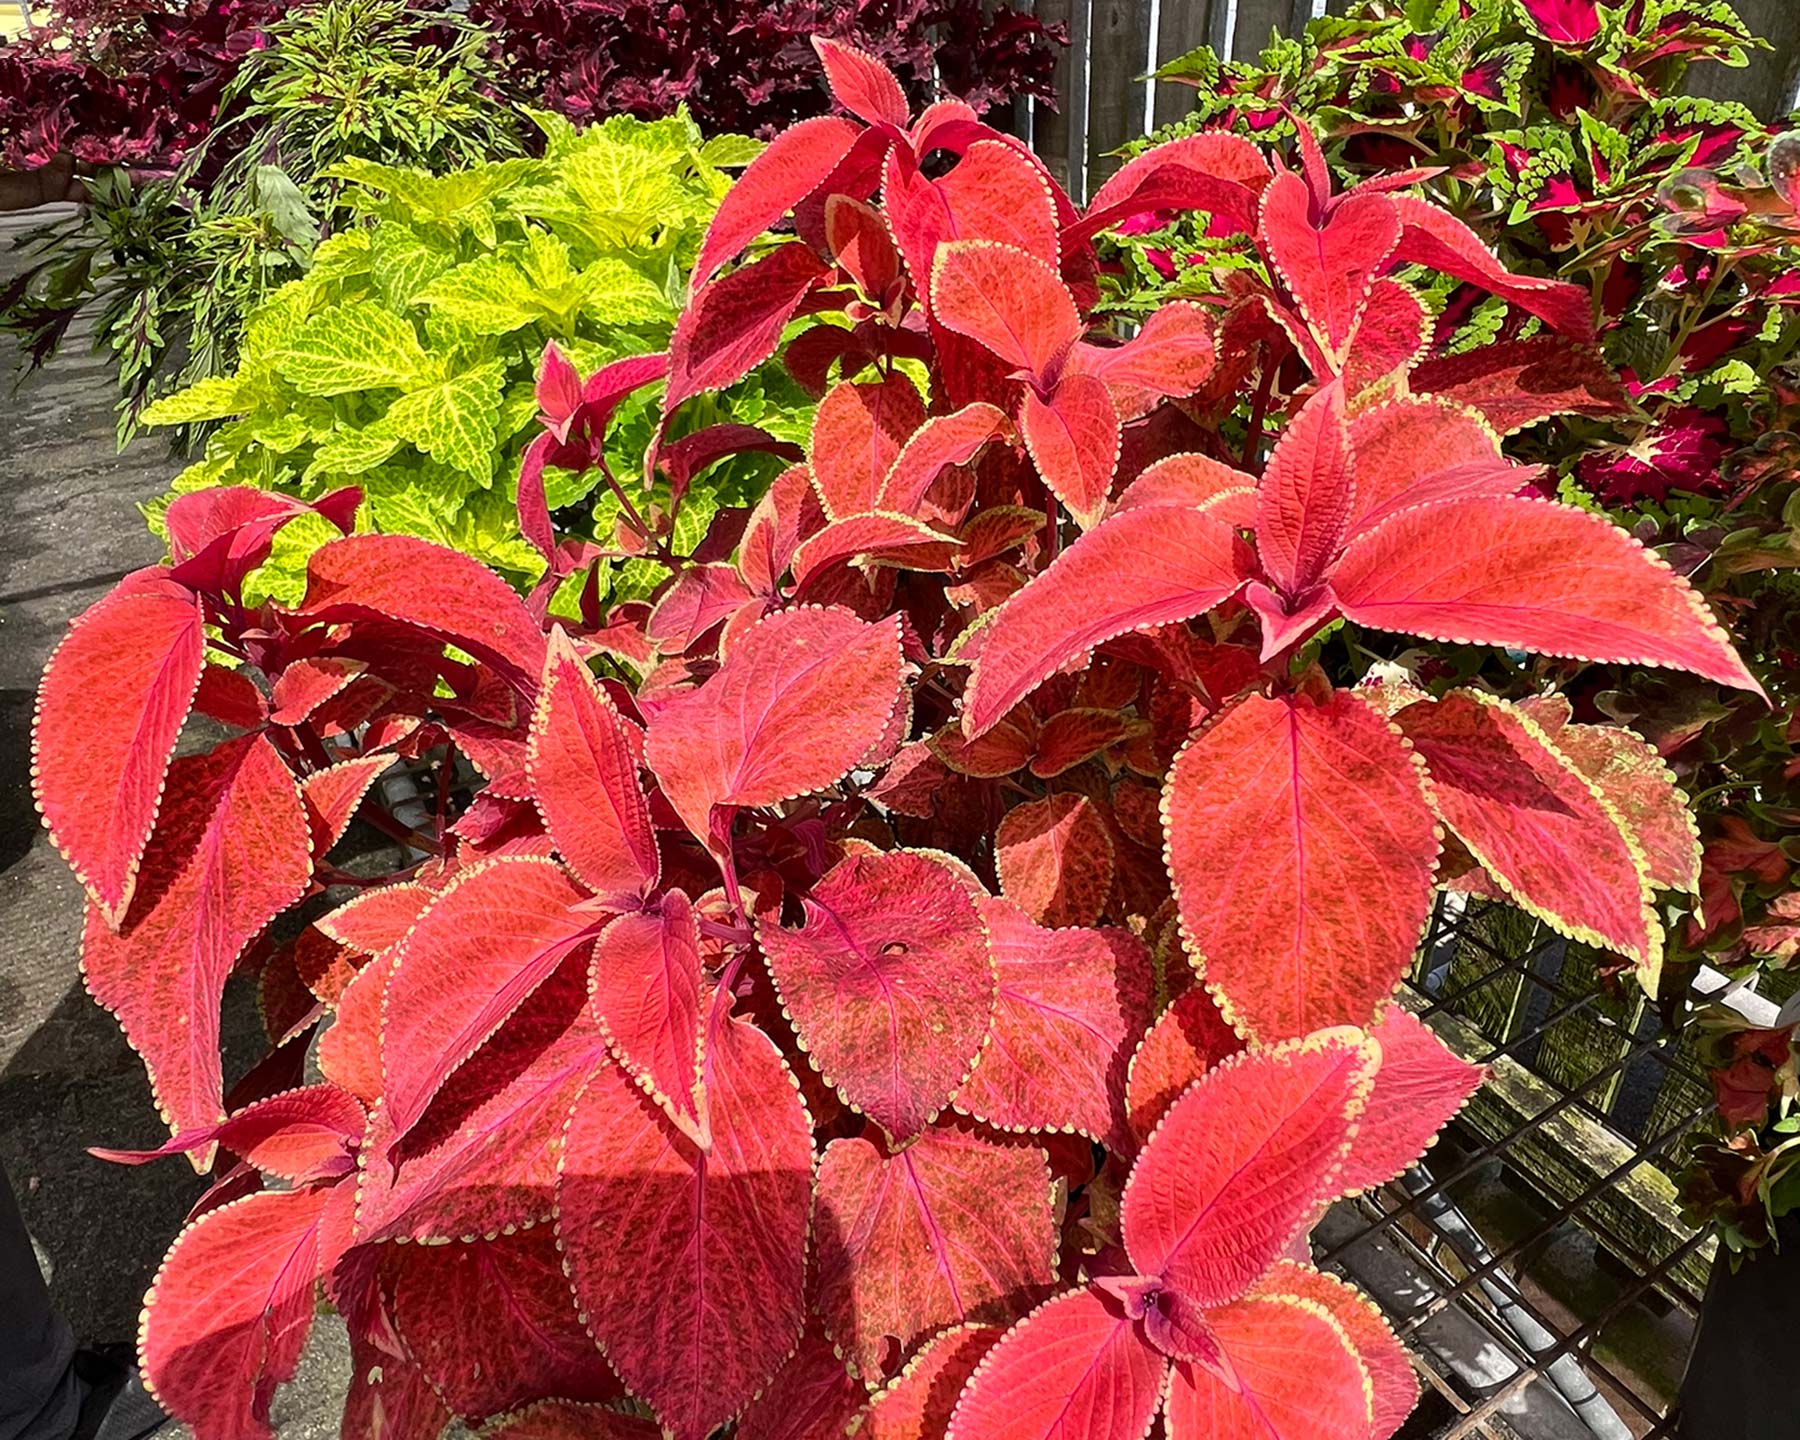 Coleus scutellarioides  - brilliant brick red leaves with a narrow pale green margin